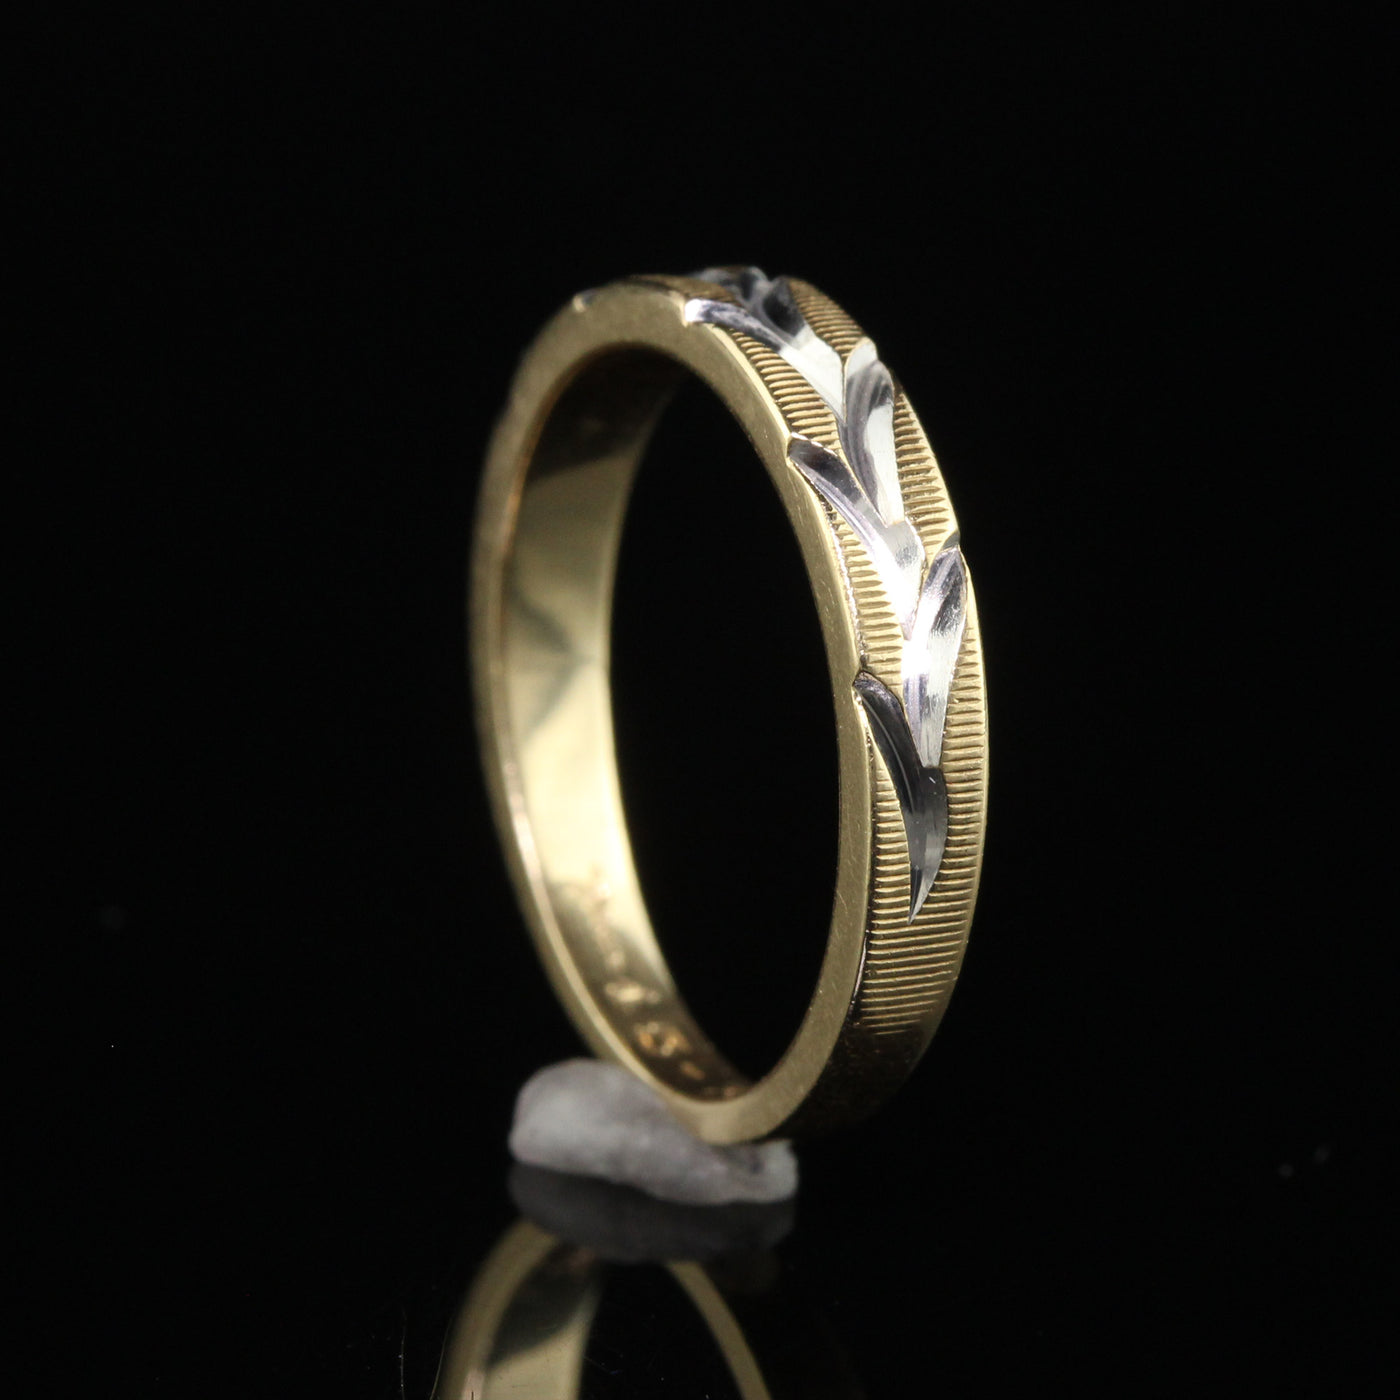 Vintage Estate 14K Yellow Gold Two Tone Engraved Floral Wedding Band - Size 5 1/4